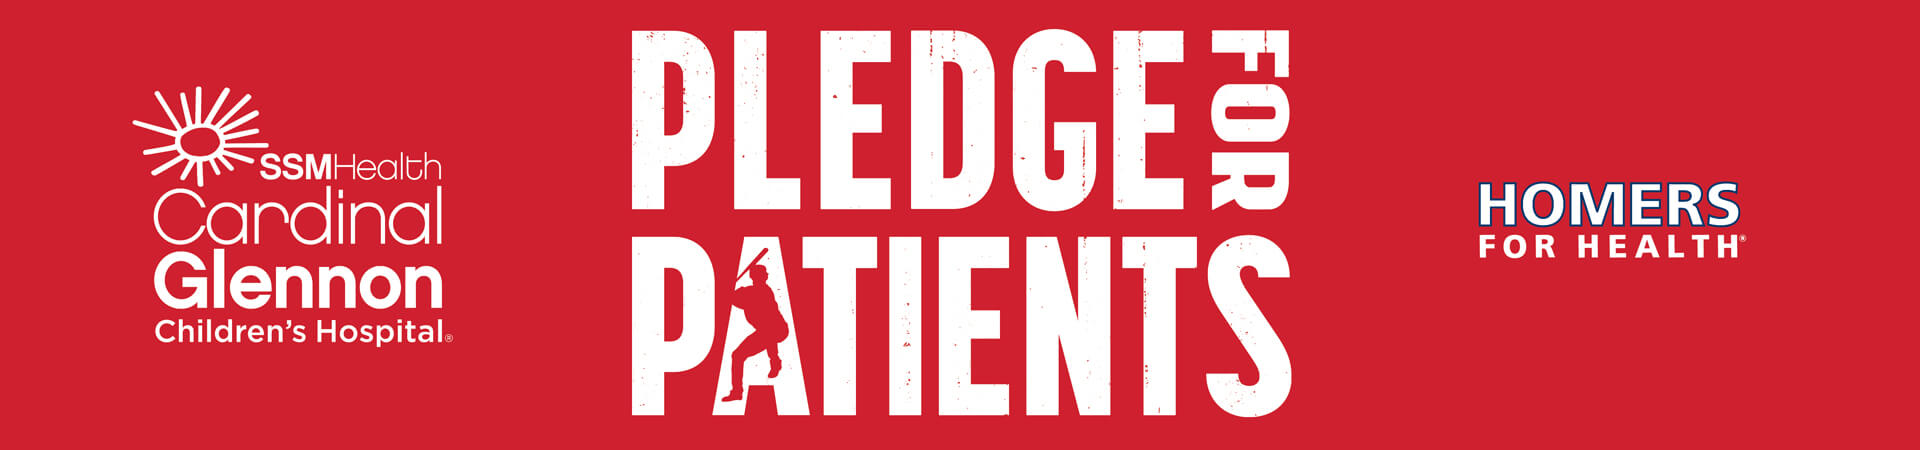 Homers for Health - Pledge for Patients